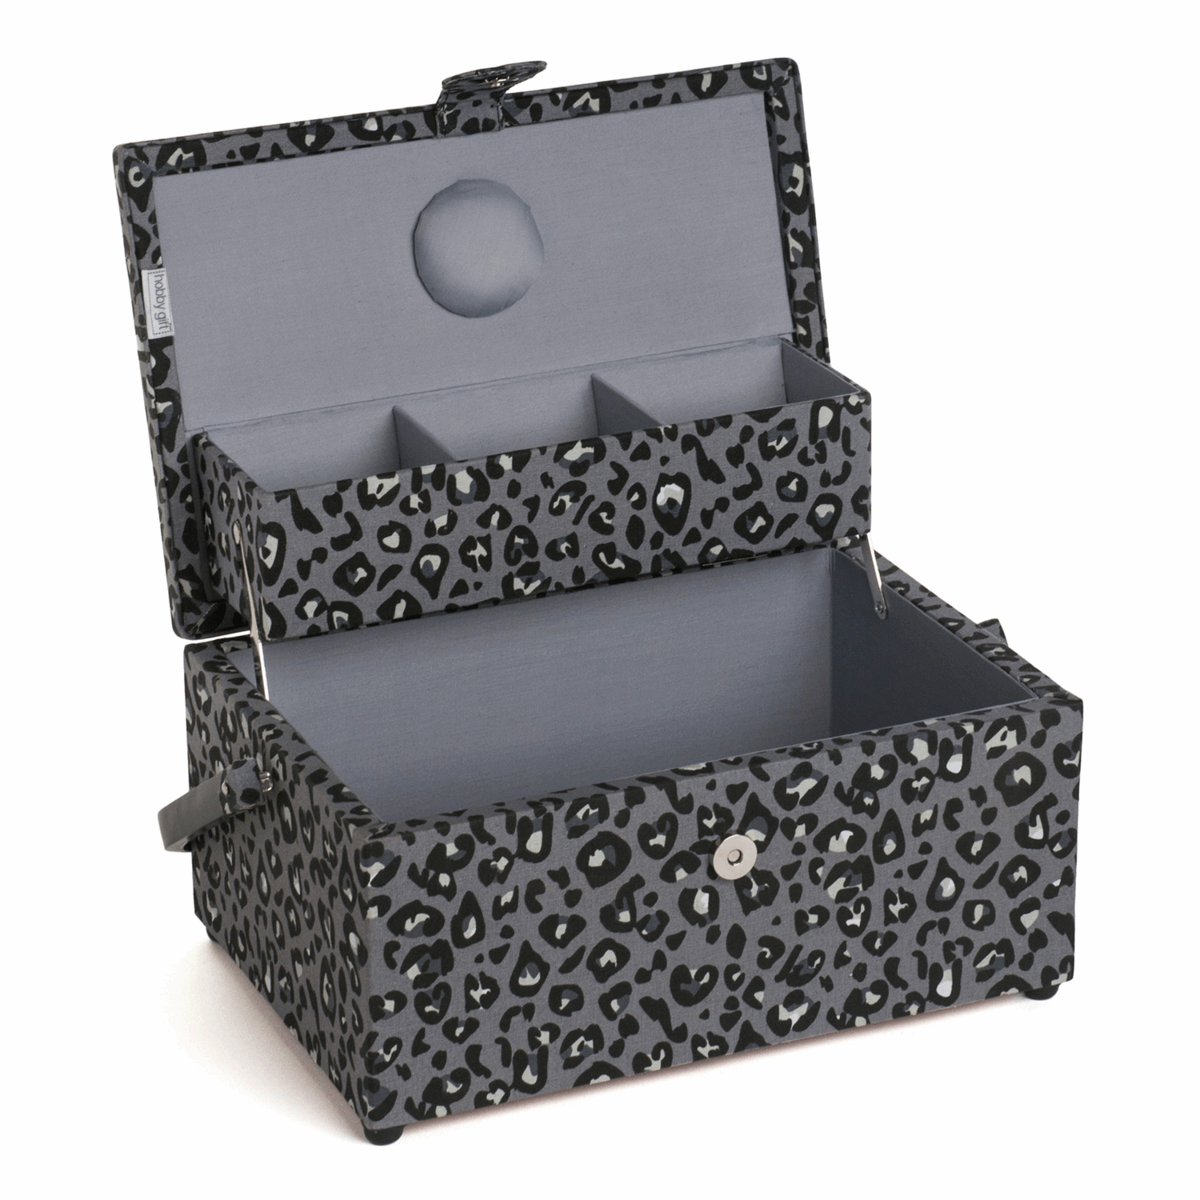 Leopard Cantilever Sewing Box - Large